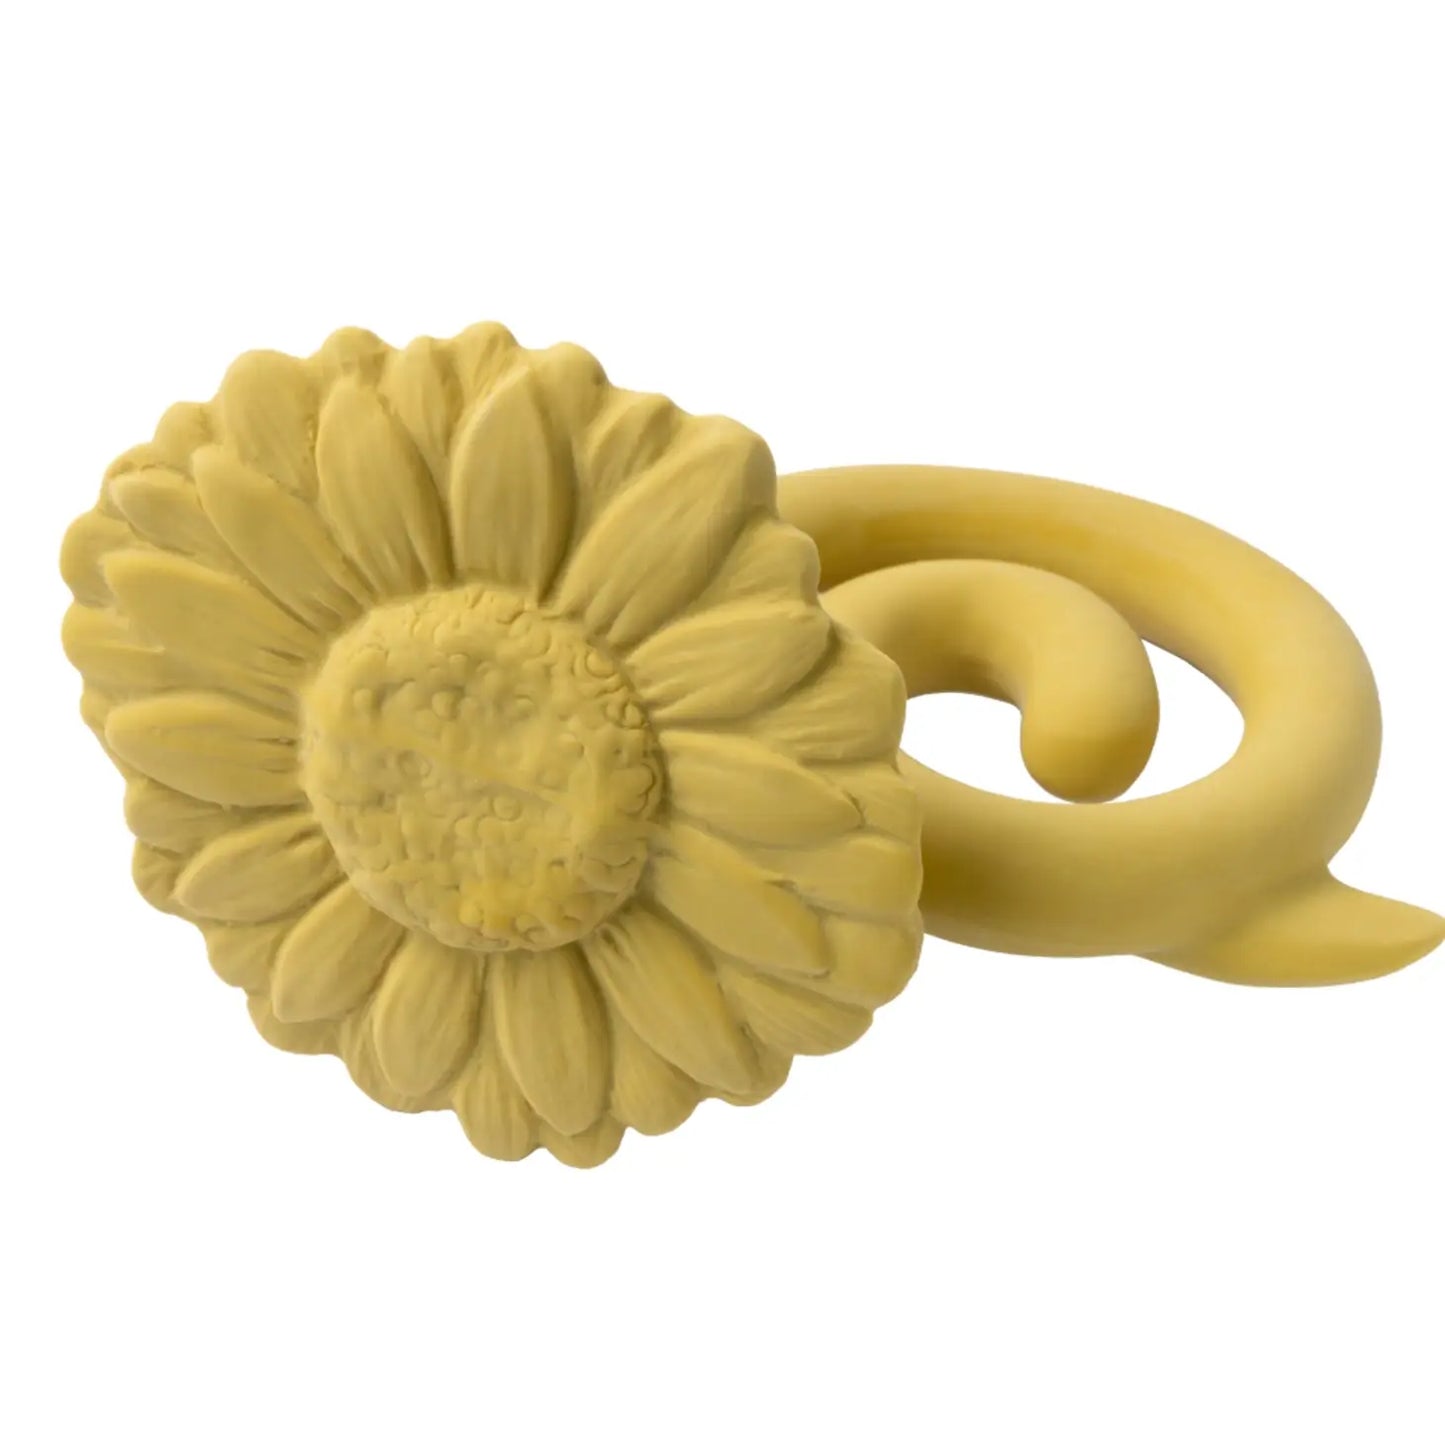 Natural Rubber Teether Sunflower - Yellow